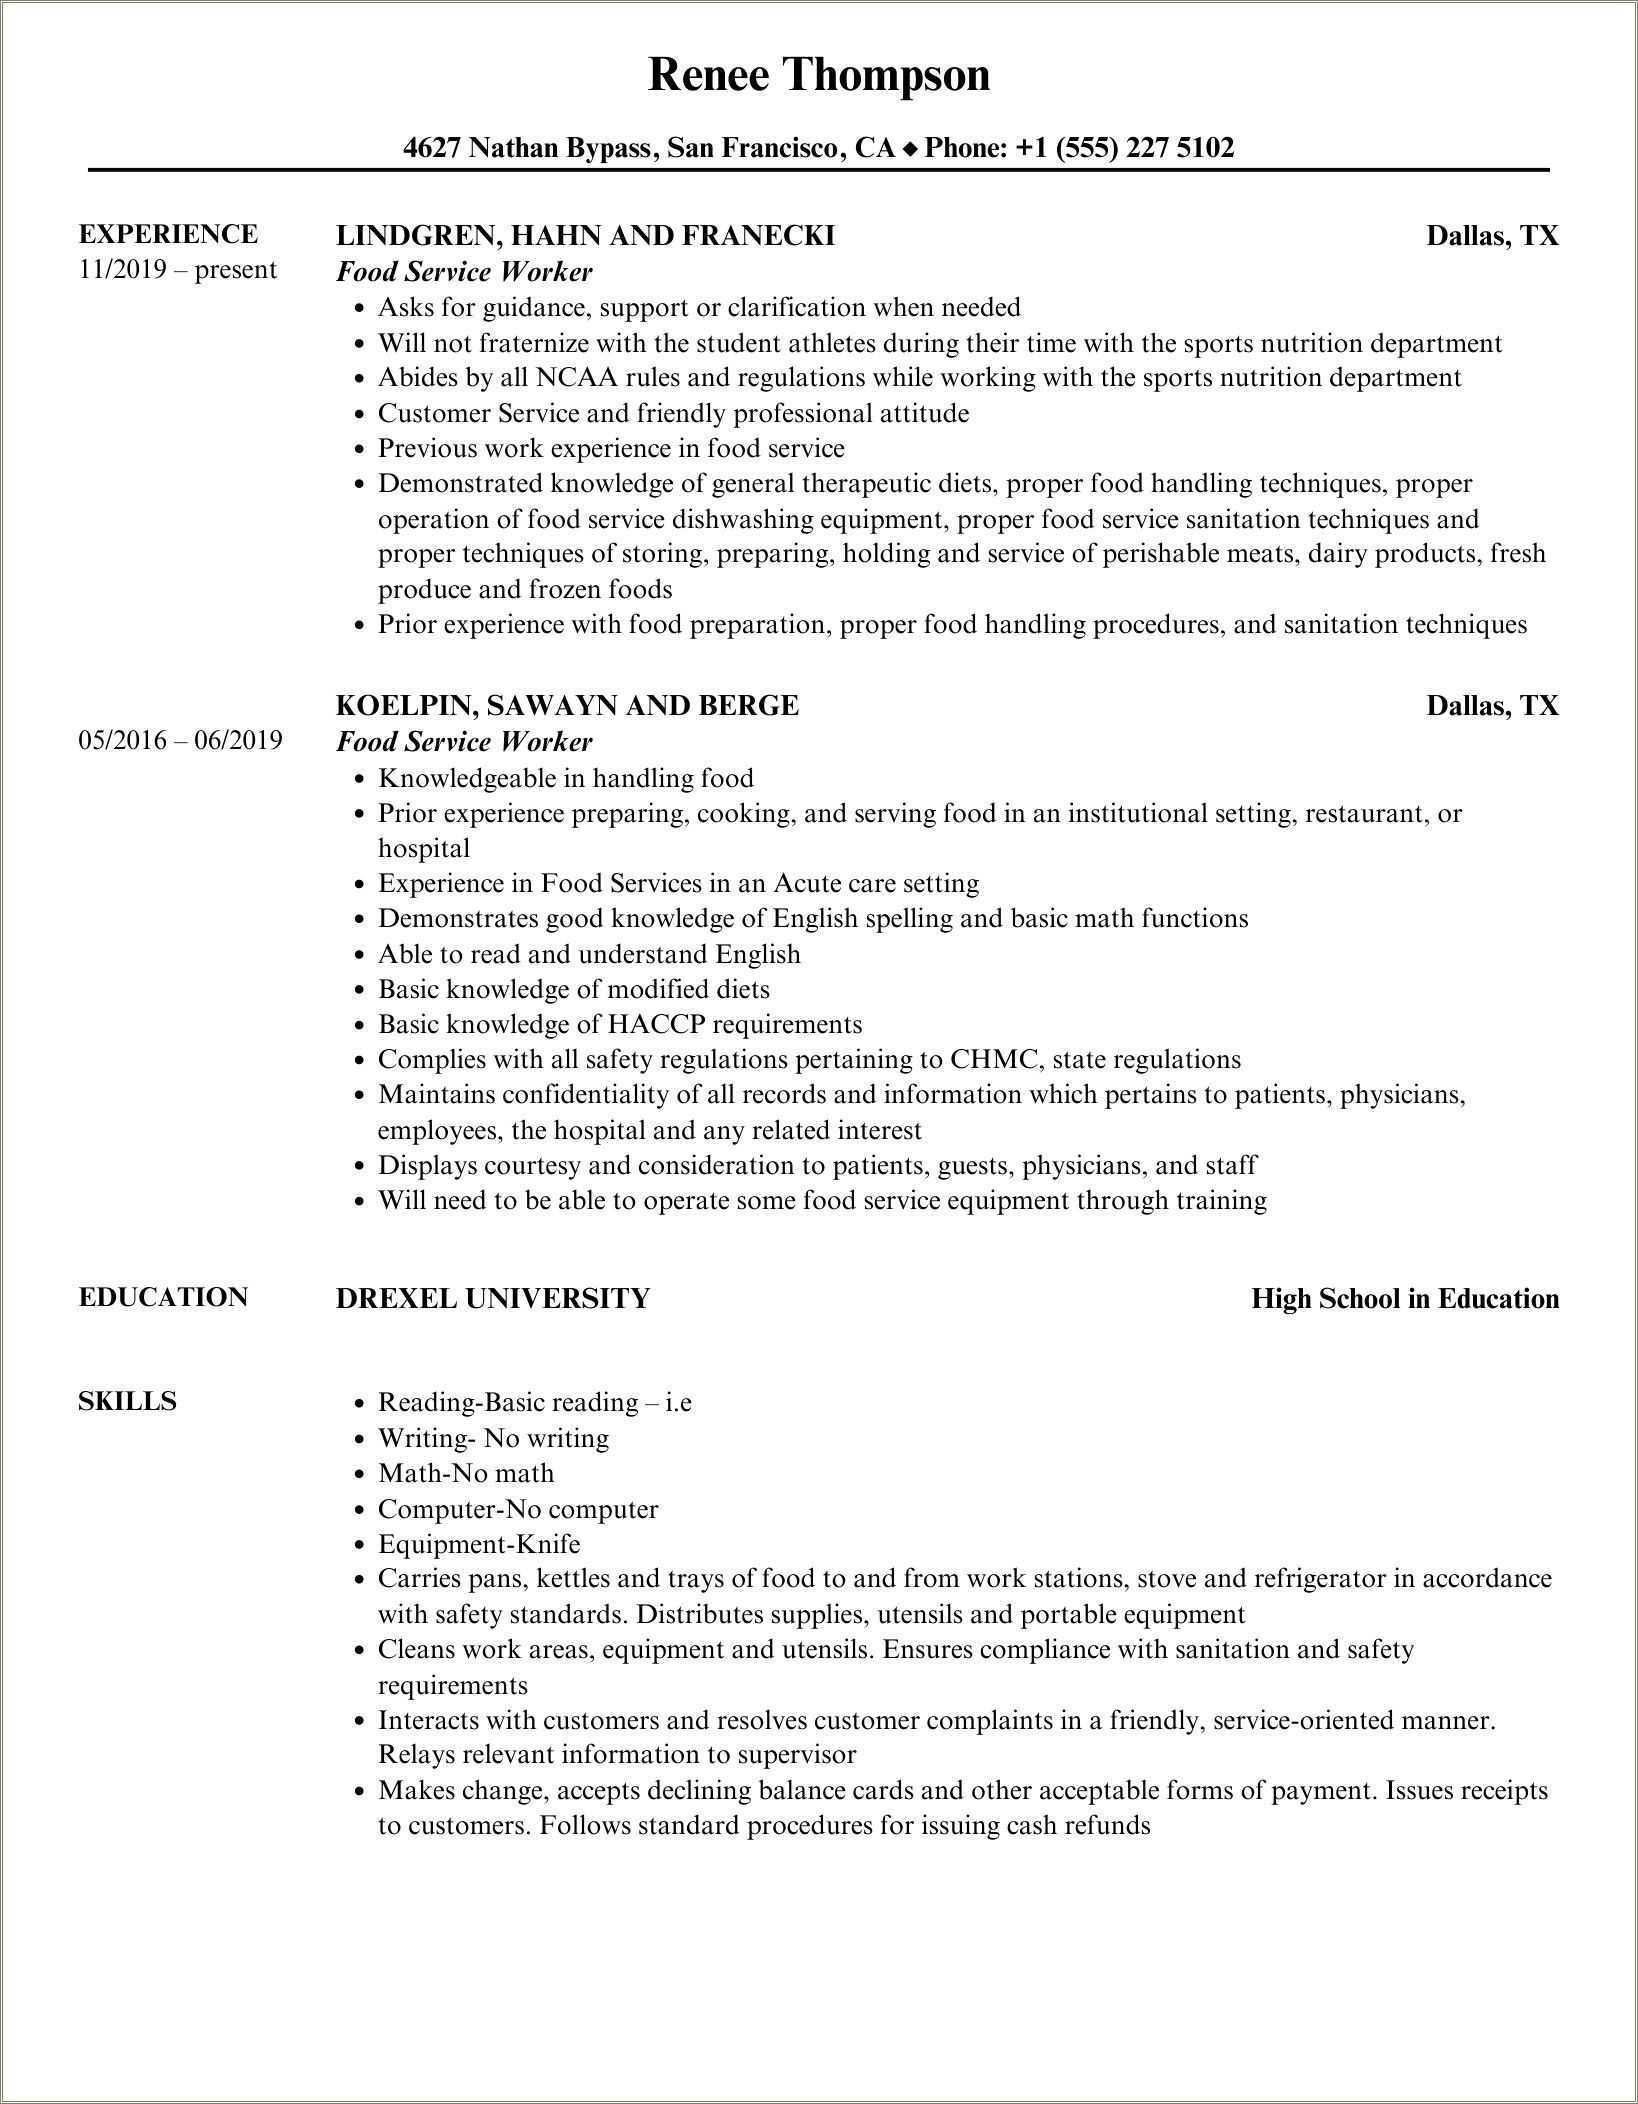 Free Resume For Food Service Worker